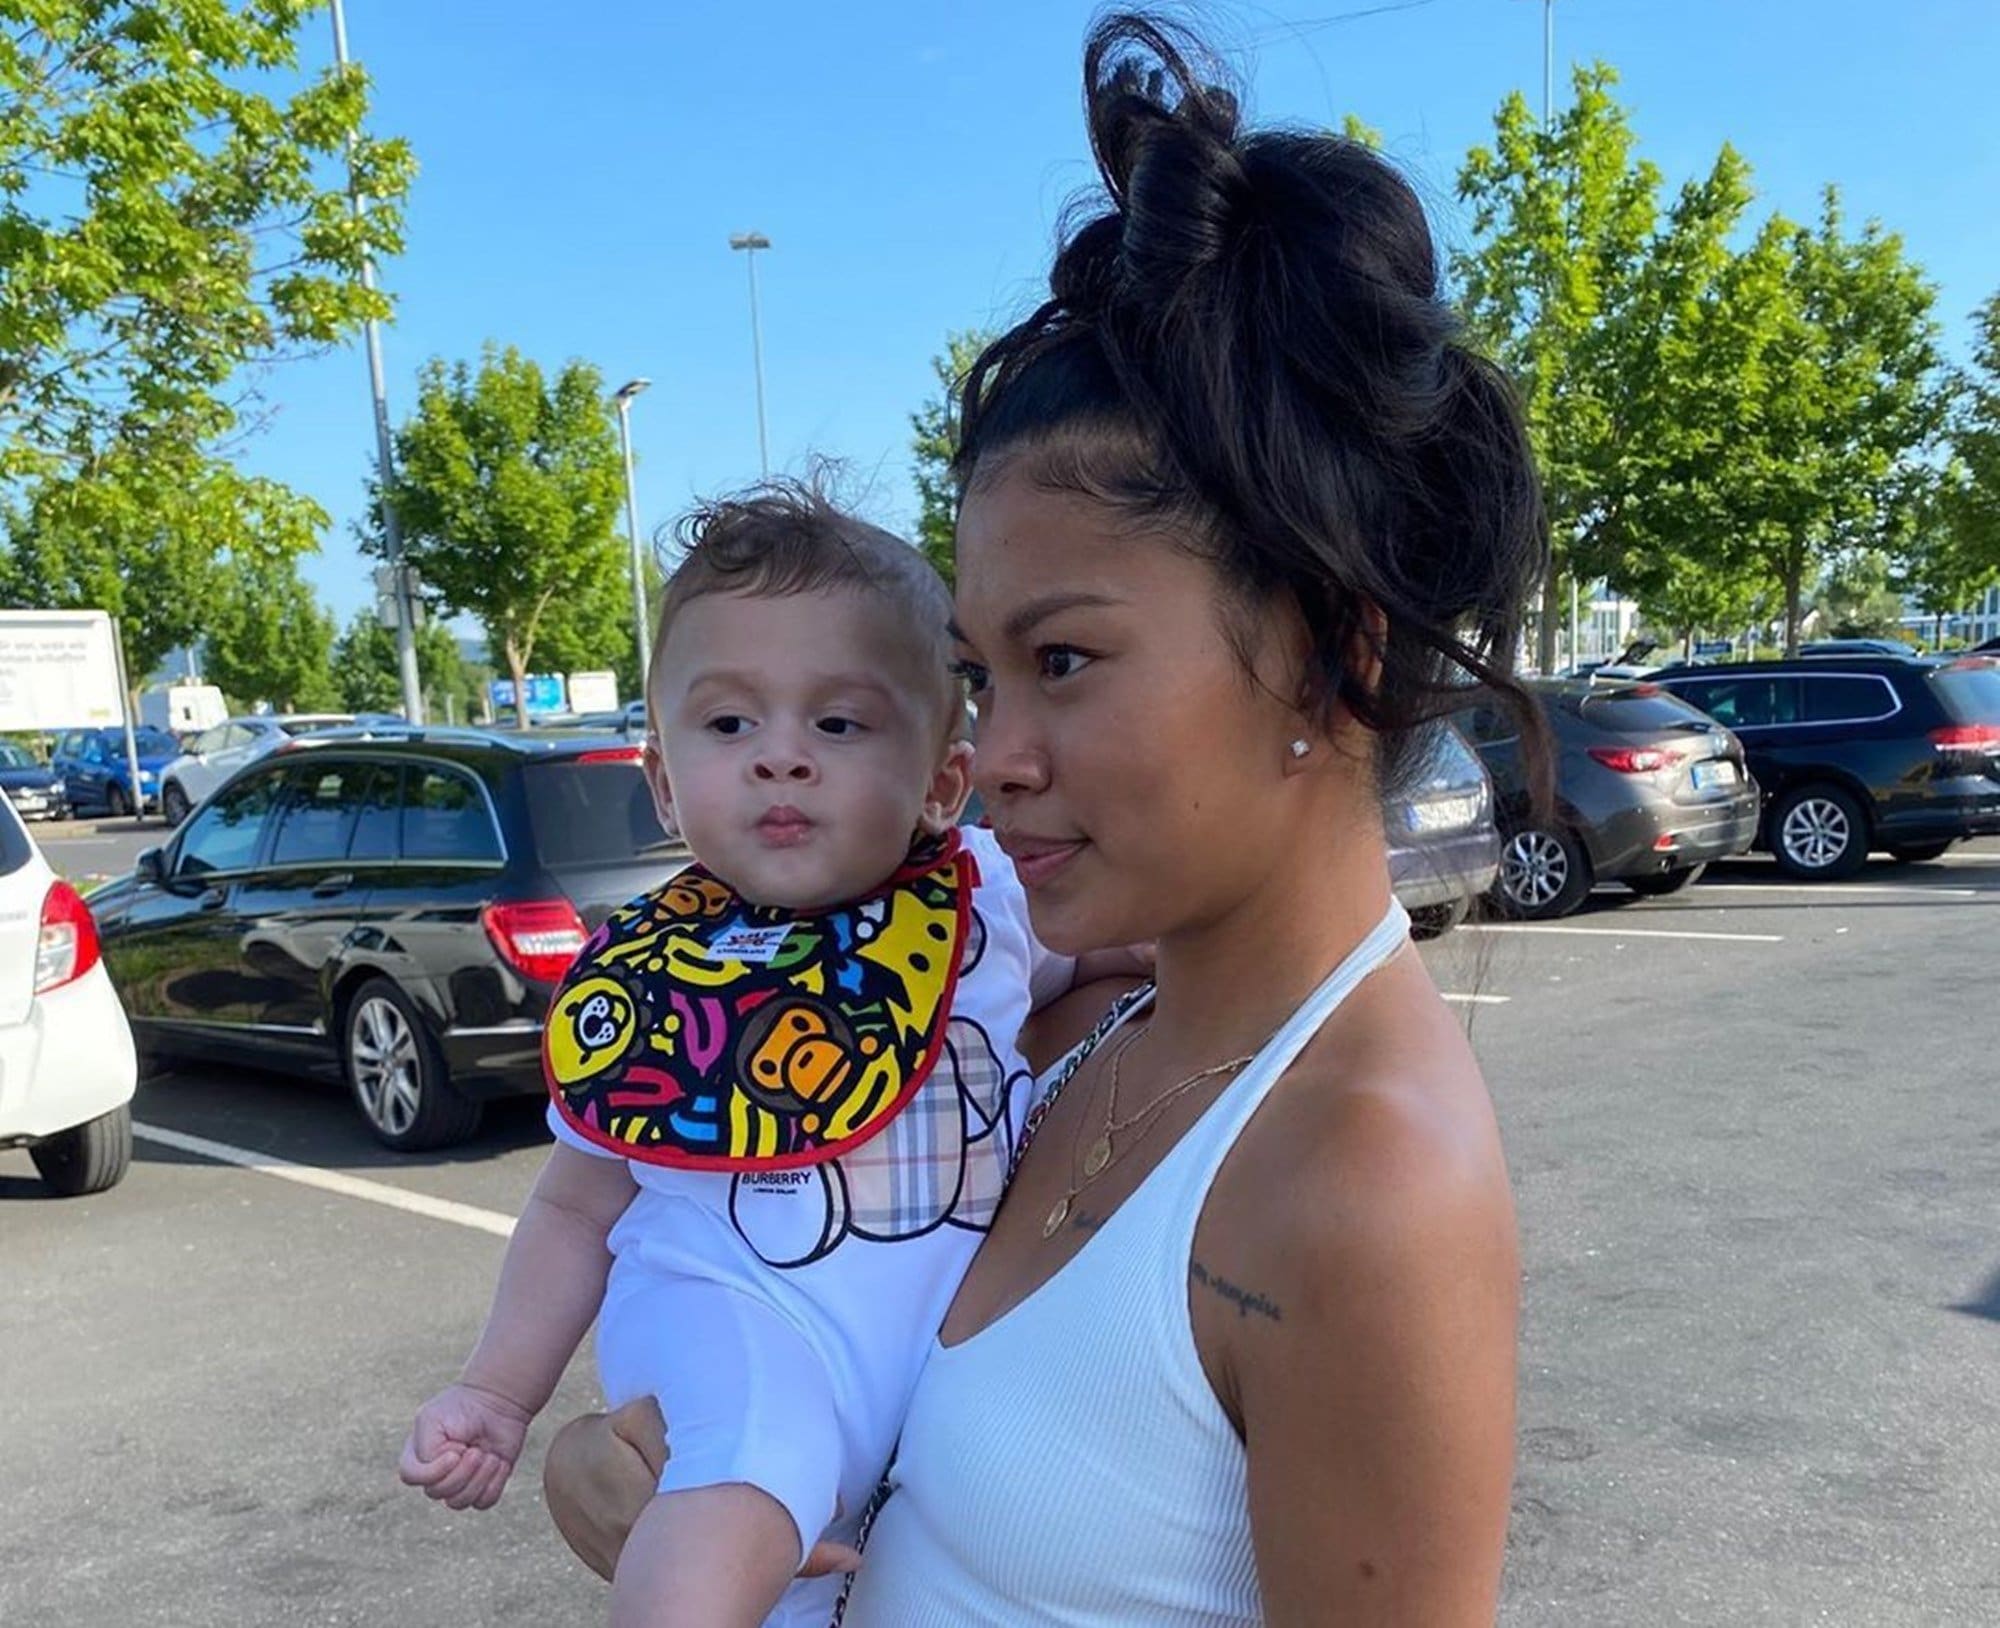 Chris Brown's Baby Mama, Ammika Harris Makes Fans' Day With This Video Featuring Aeko